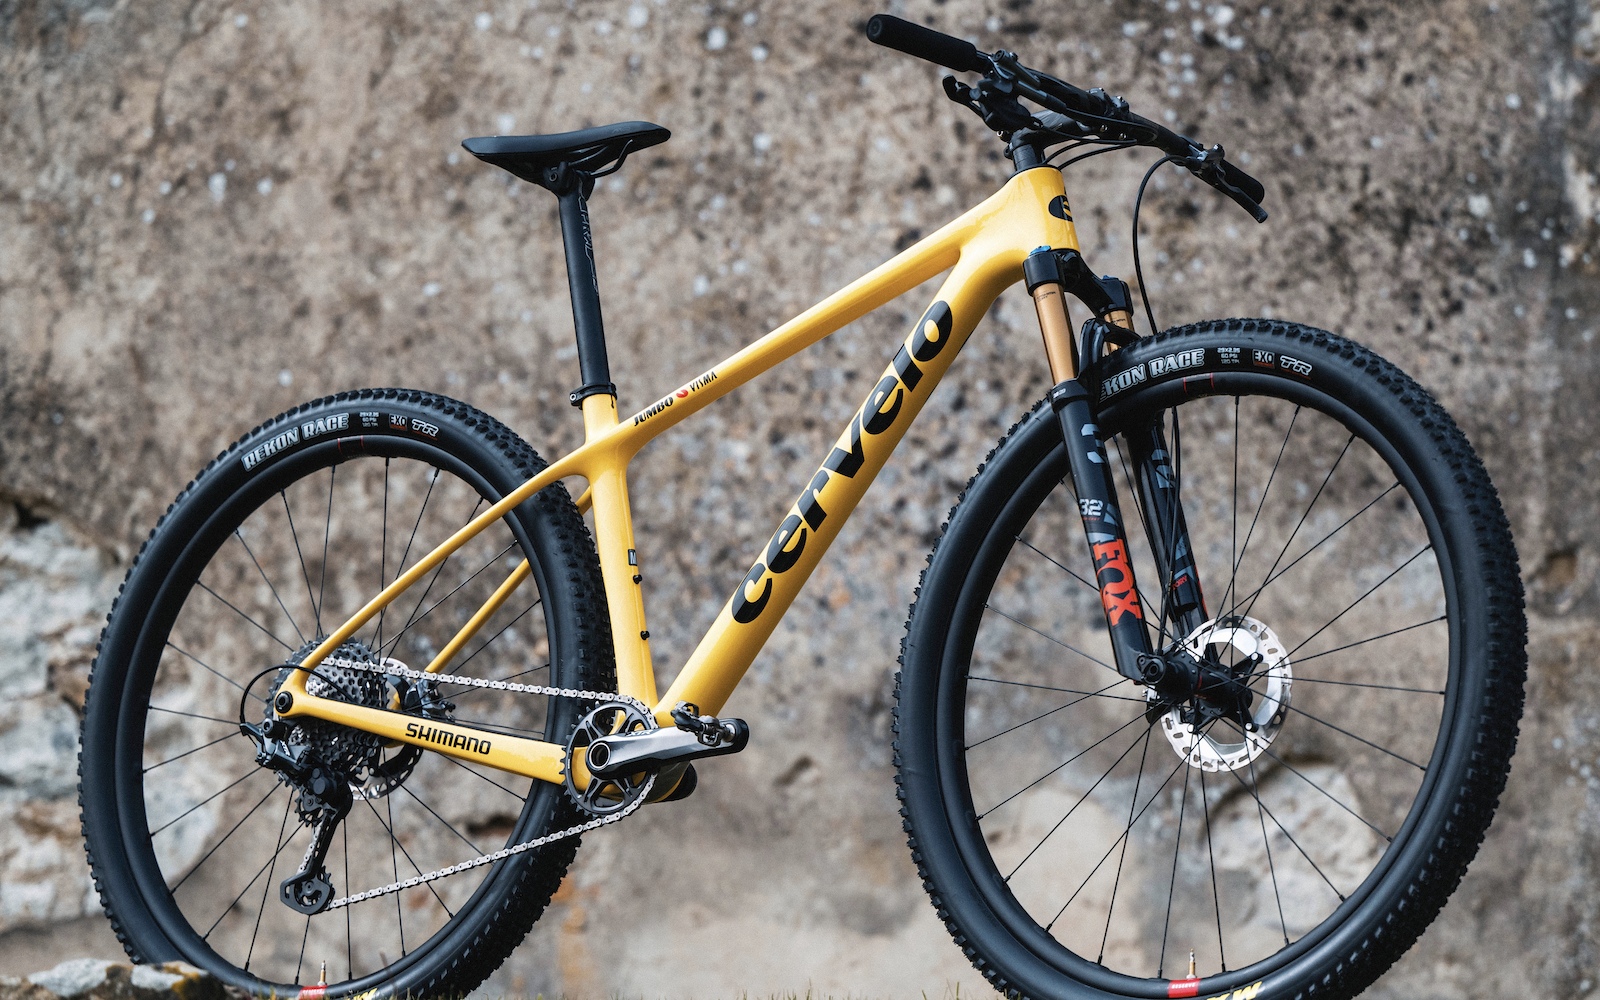 Cable Routing Systems and ultra-light carbon fiber's handlebars developed  with team Jumbo Visma